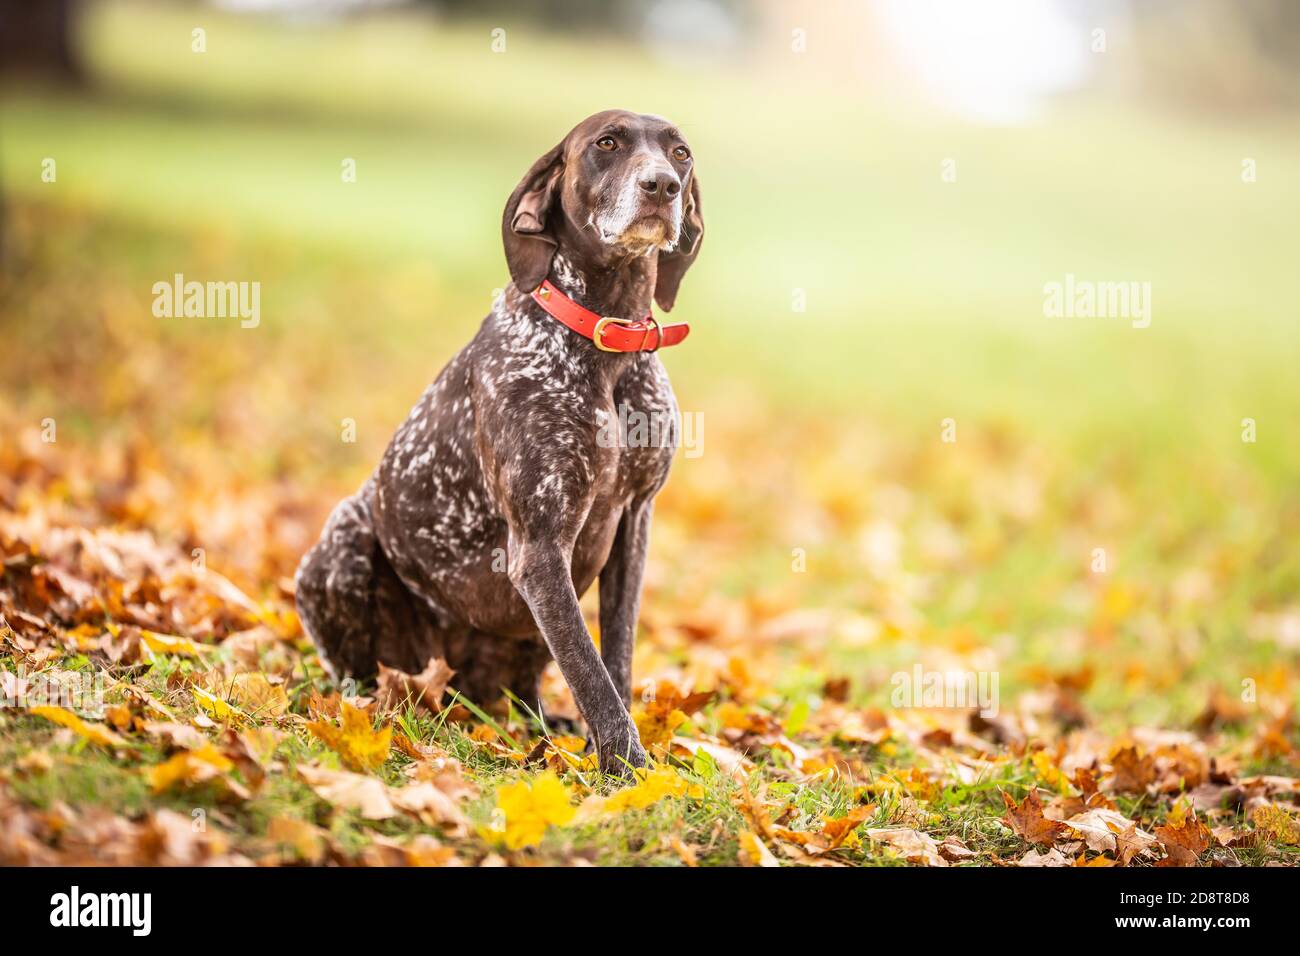 Brown and white dog with a red collar sits obediently outdoors during an  autumn walk Stock Photo - Alamy